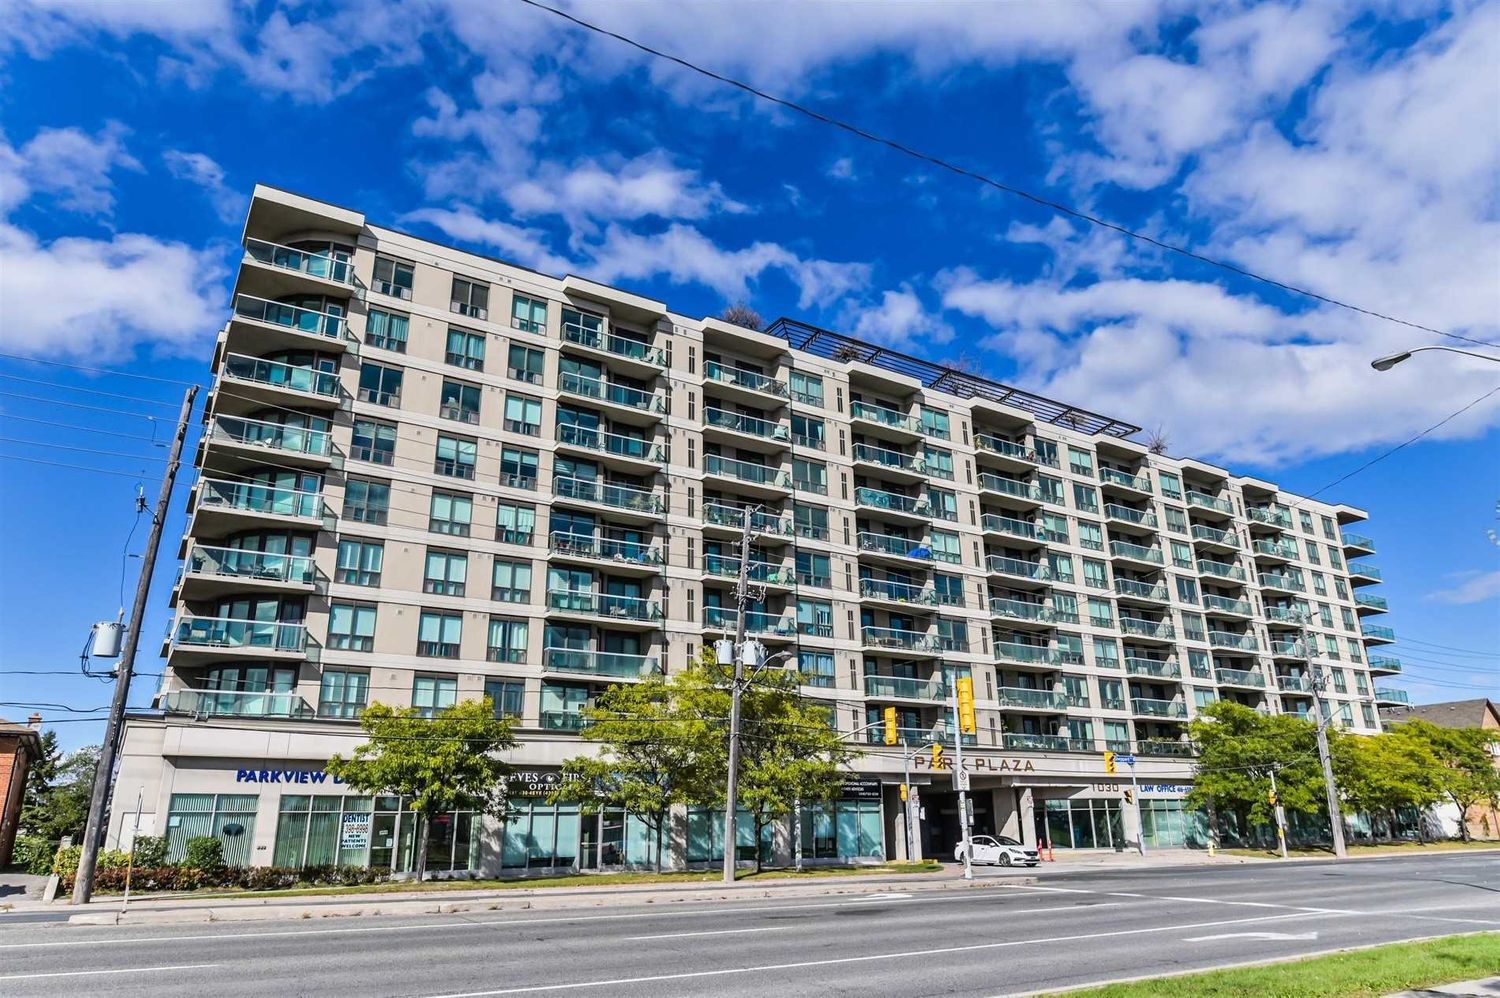 1030 Sheppard Avenue. Park Plaza Condos is located in  North York, Toronto - image #1 of 2